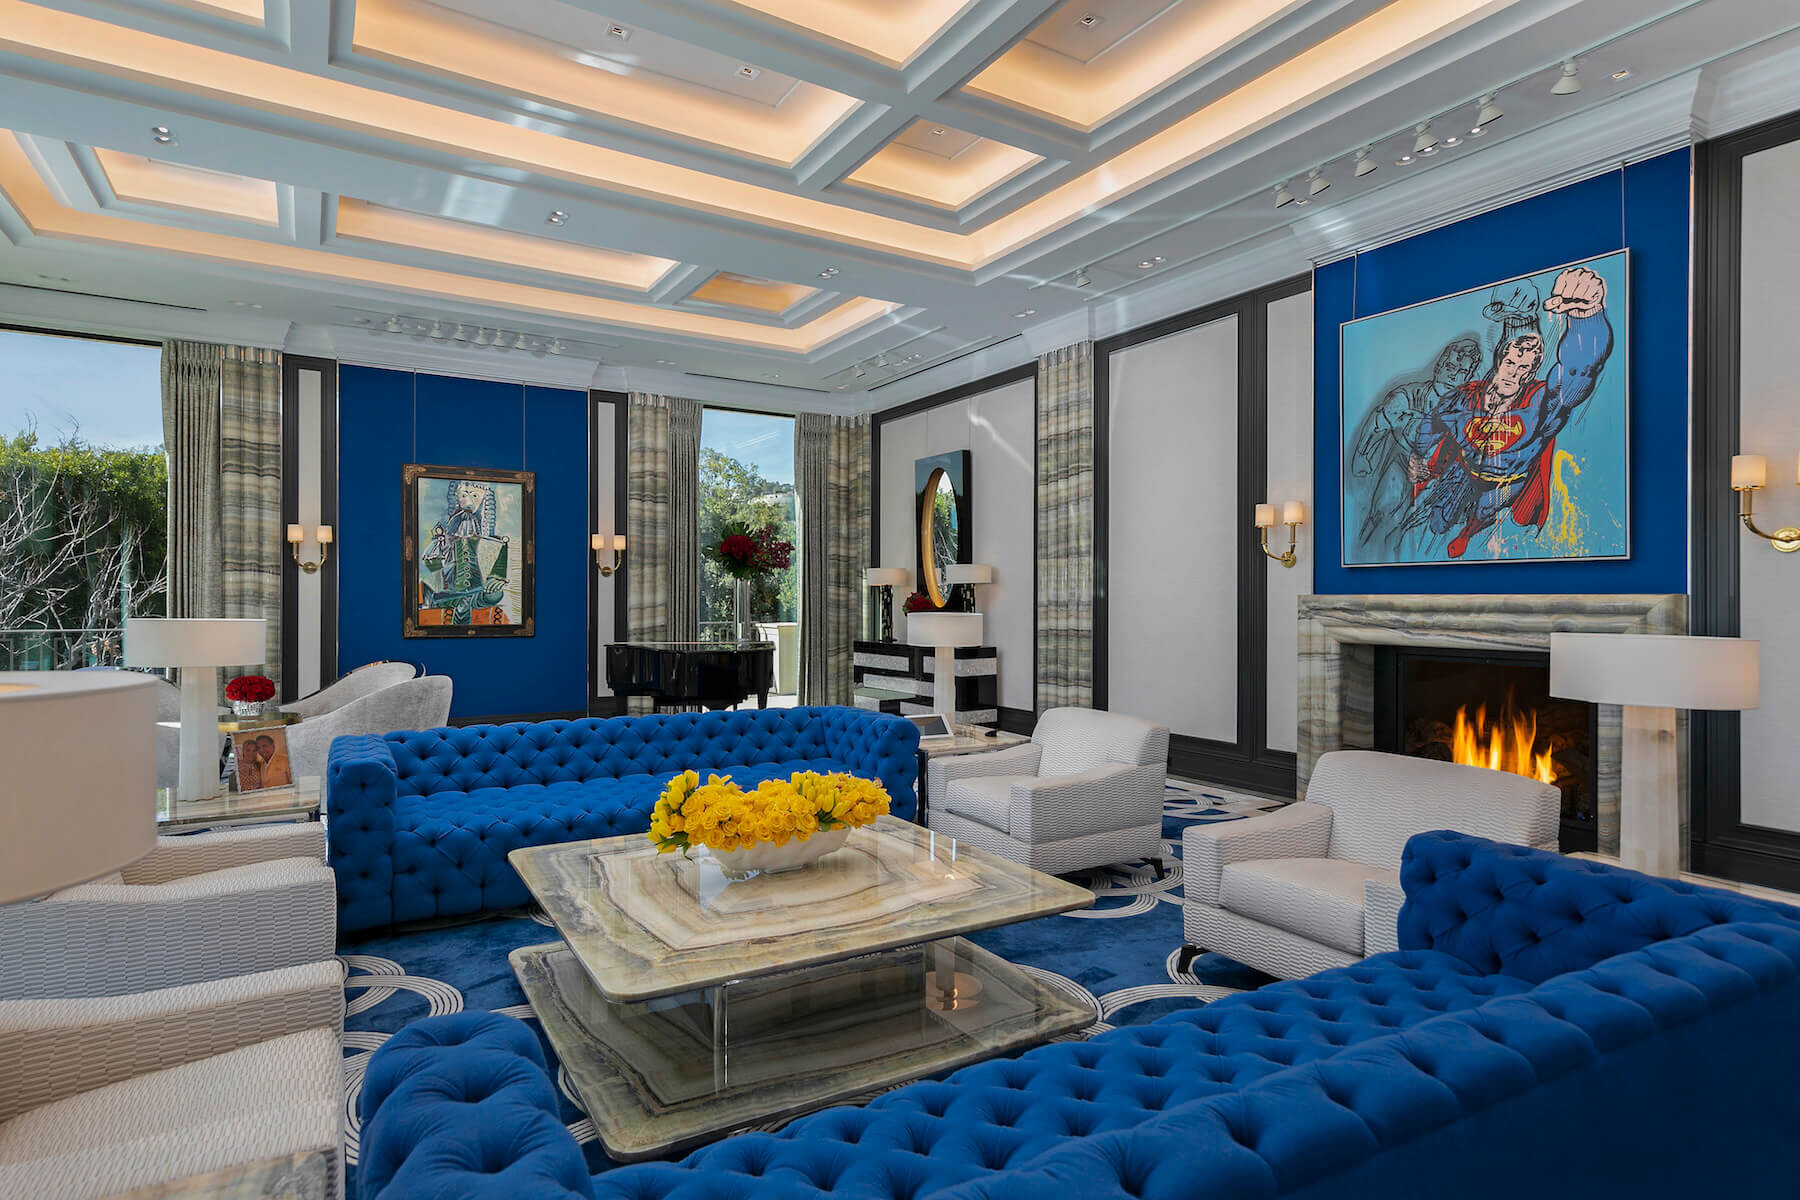 A Great Room filled with coffered ceilings, velvety blue patterned carpet, large floor-to-ceiling windows, and a stately marble fireplace